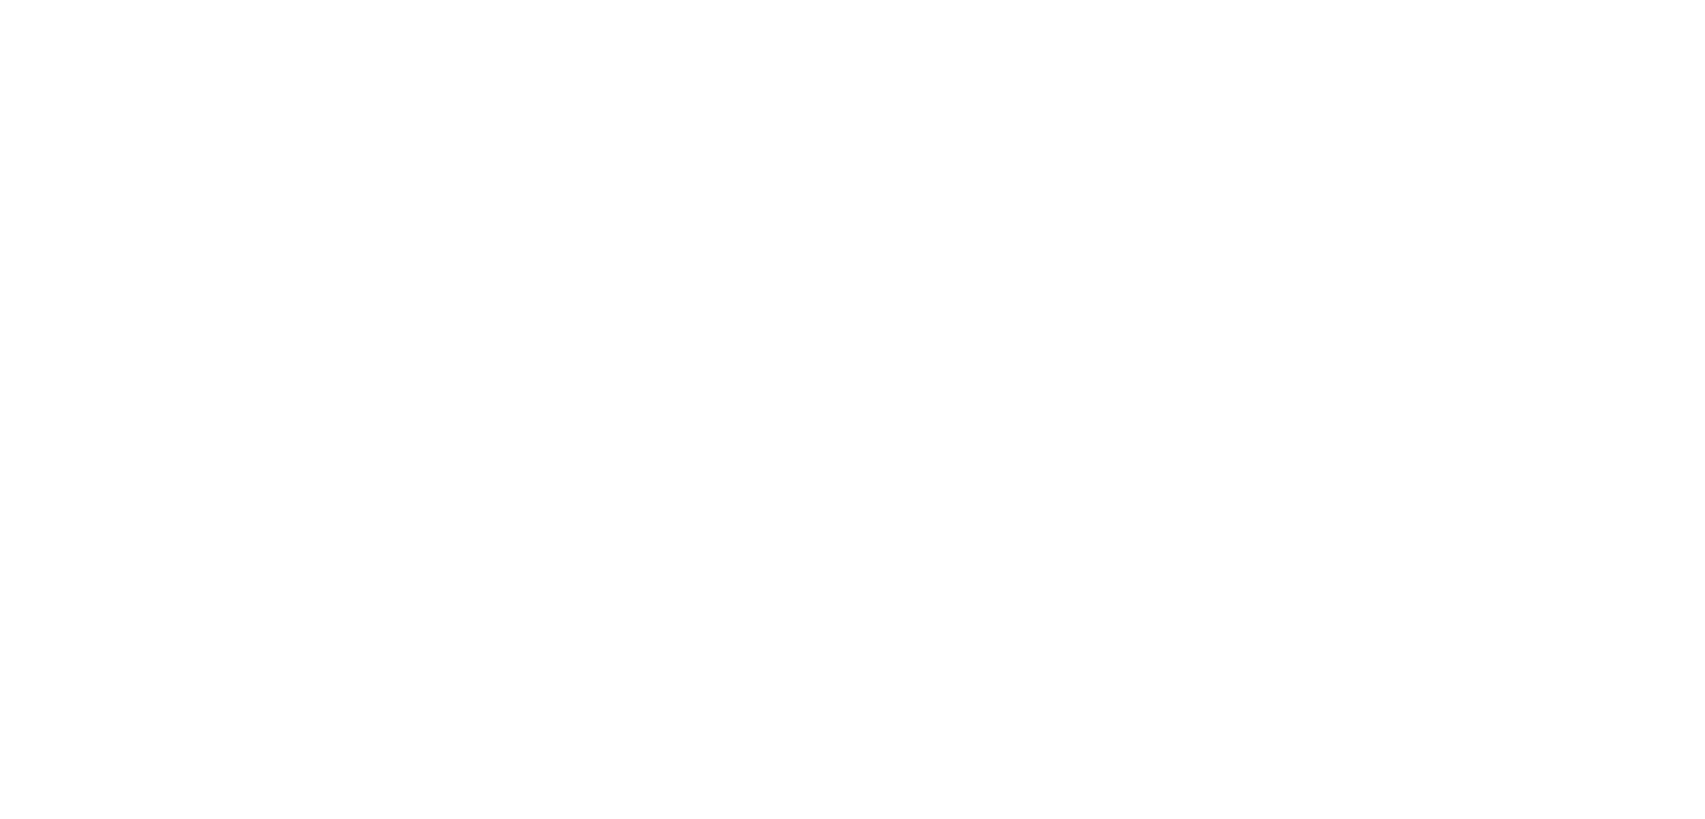 Mexican Geniuses Washington, D.C.: A Frida & Diego Immersive Experience